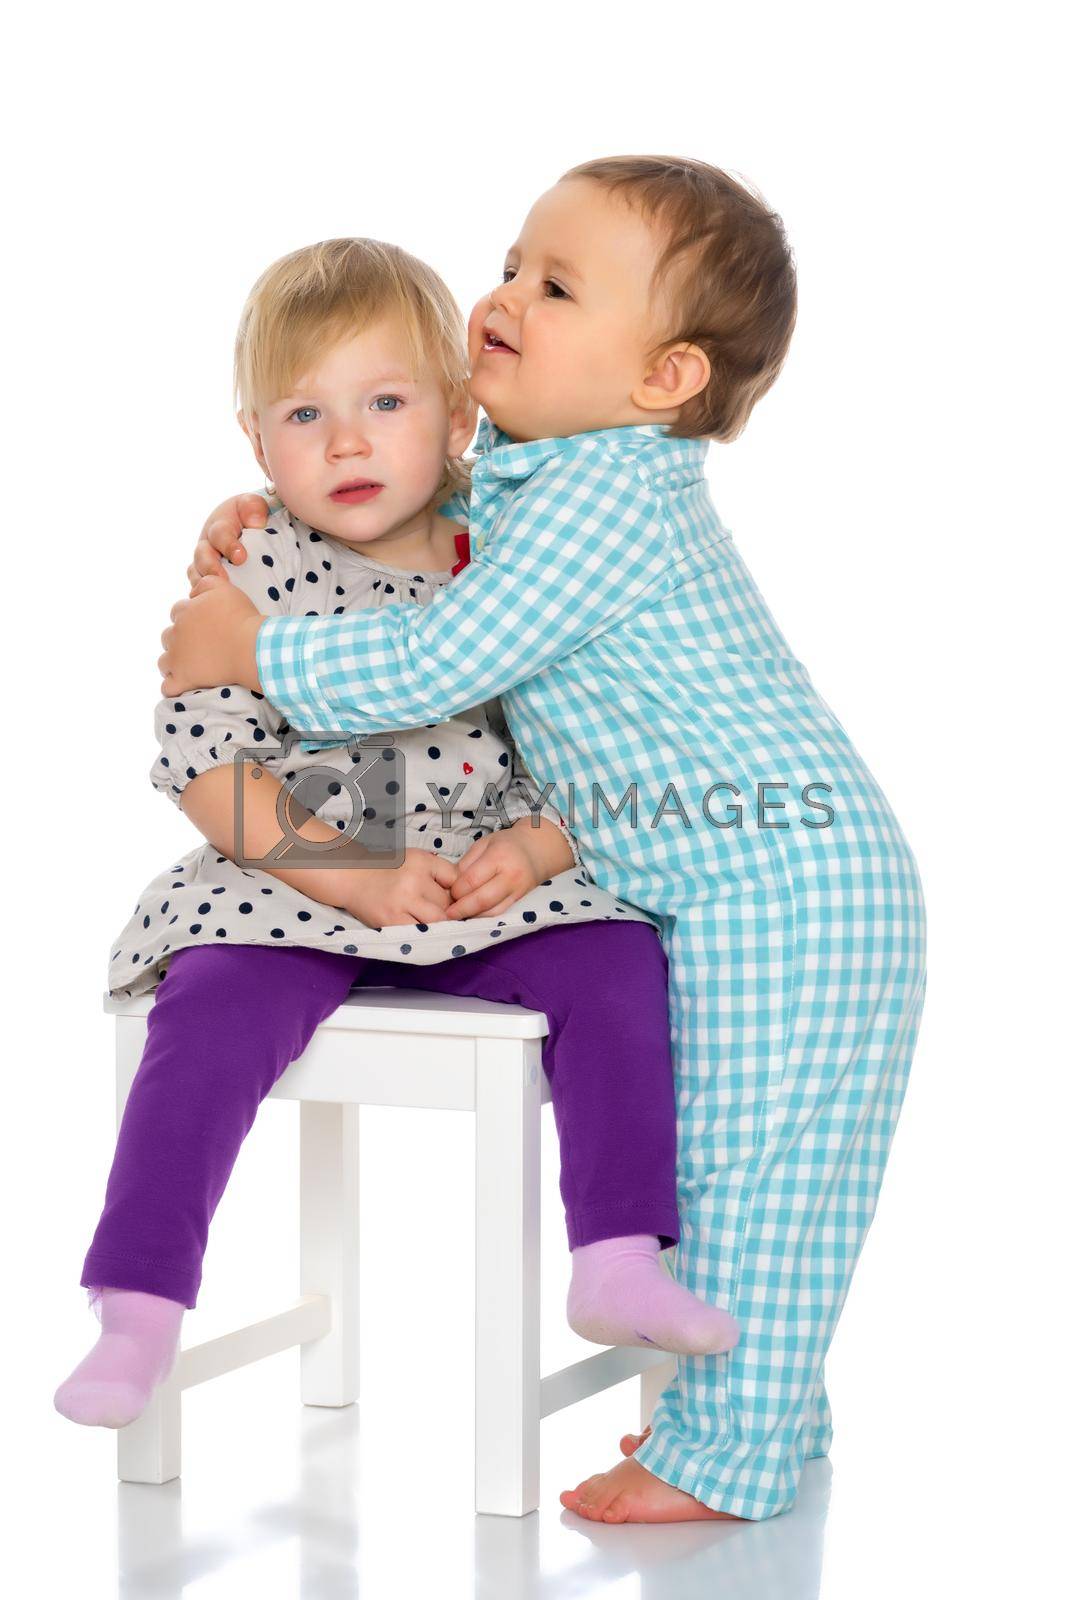 Royalty free image of Babies boys and a girl cute embrace. by kolesnikov_studio